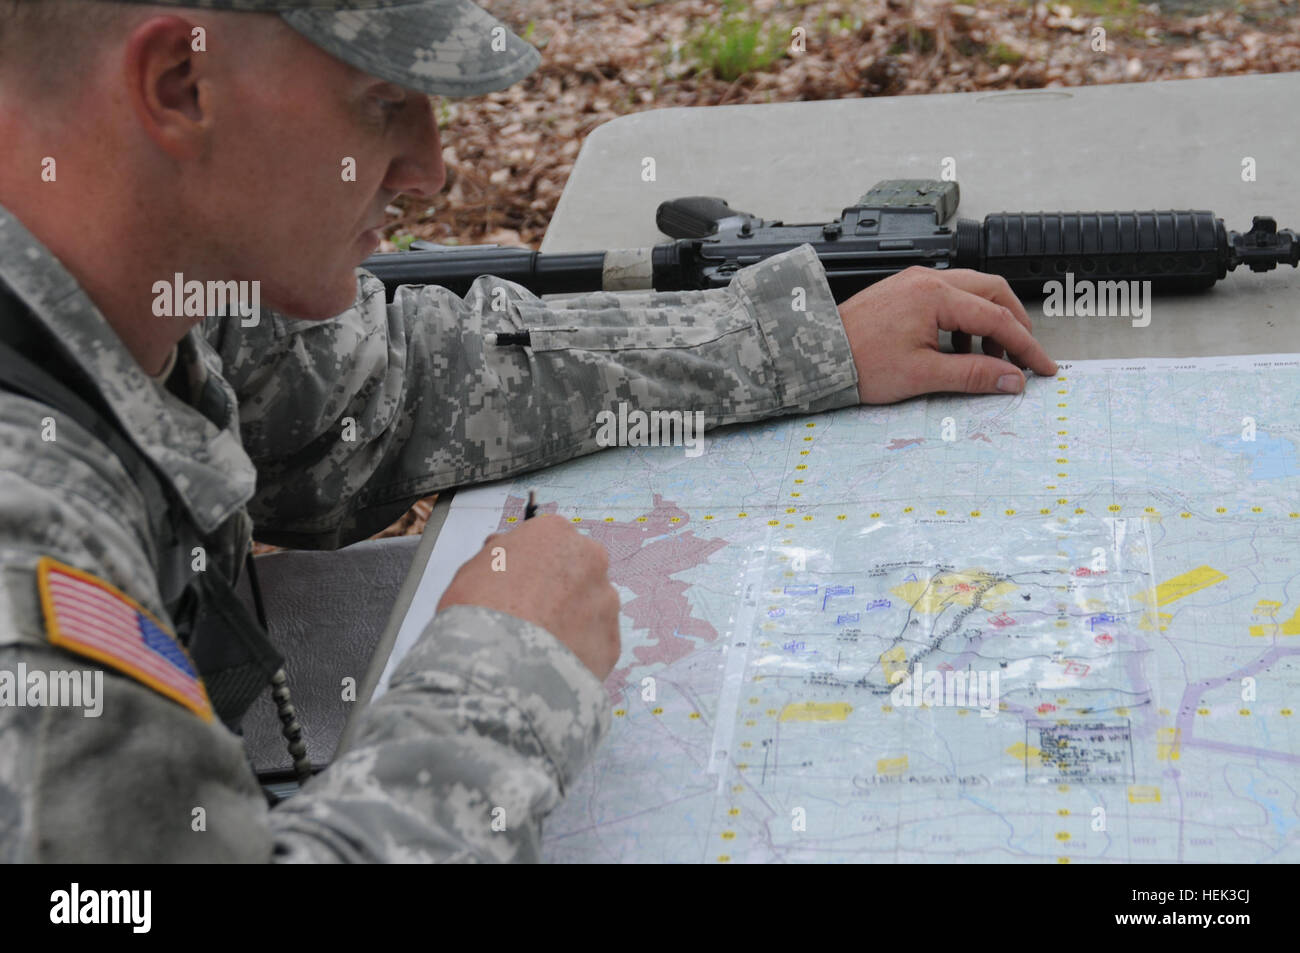 Specialist John Sanders, from Sandusky, Ohio, assigned to B Company, 1st Battalion, 1st Special Warfare Training Group (Airborne), identifies terrain features on a military map during the U.S. Army John F. Kennedy Special Warfare Center and School's Soldier and Noncommissioned Officer of the Year competition at Fort Bragg, N.C. May 18. Special Warfare Center Soldier of the Year 281306 Stock Photo